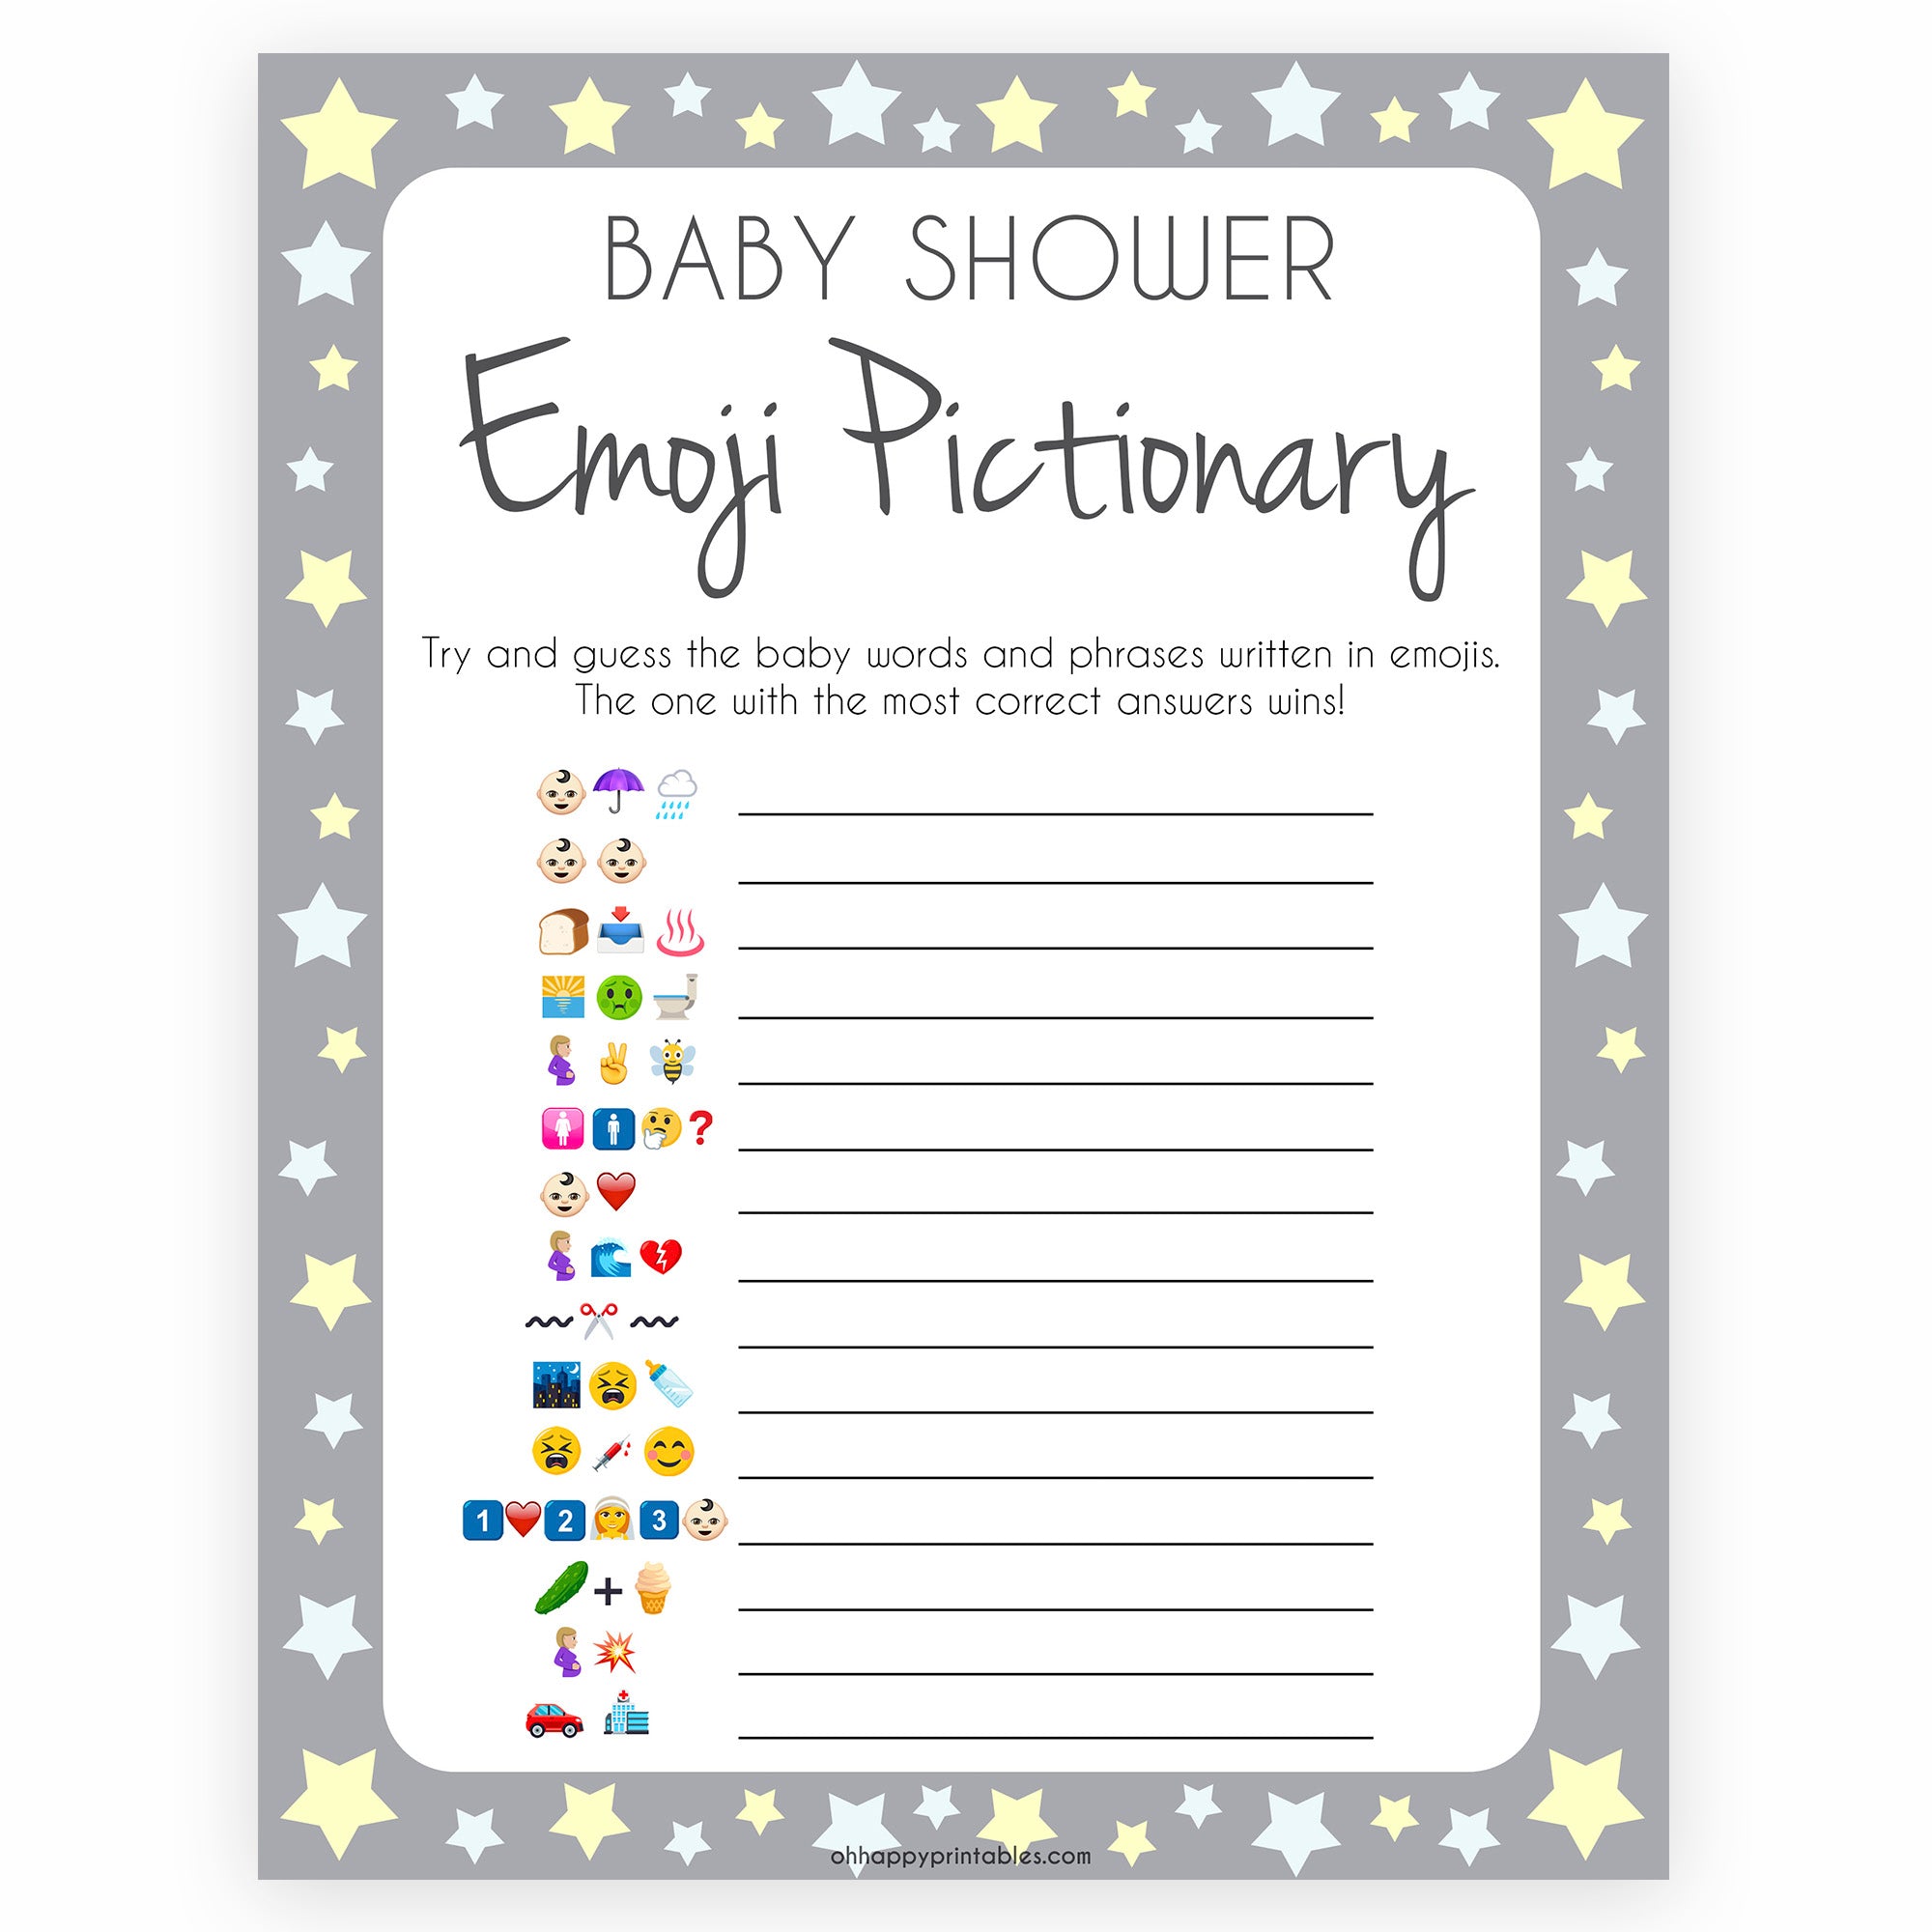 baby-shower-emoji-pictionary-game-answers-baby-shower-emoji-pictionary